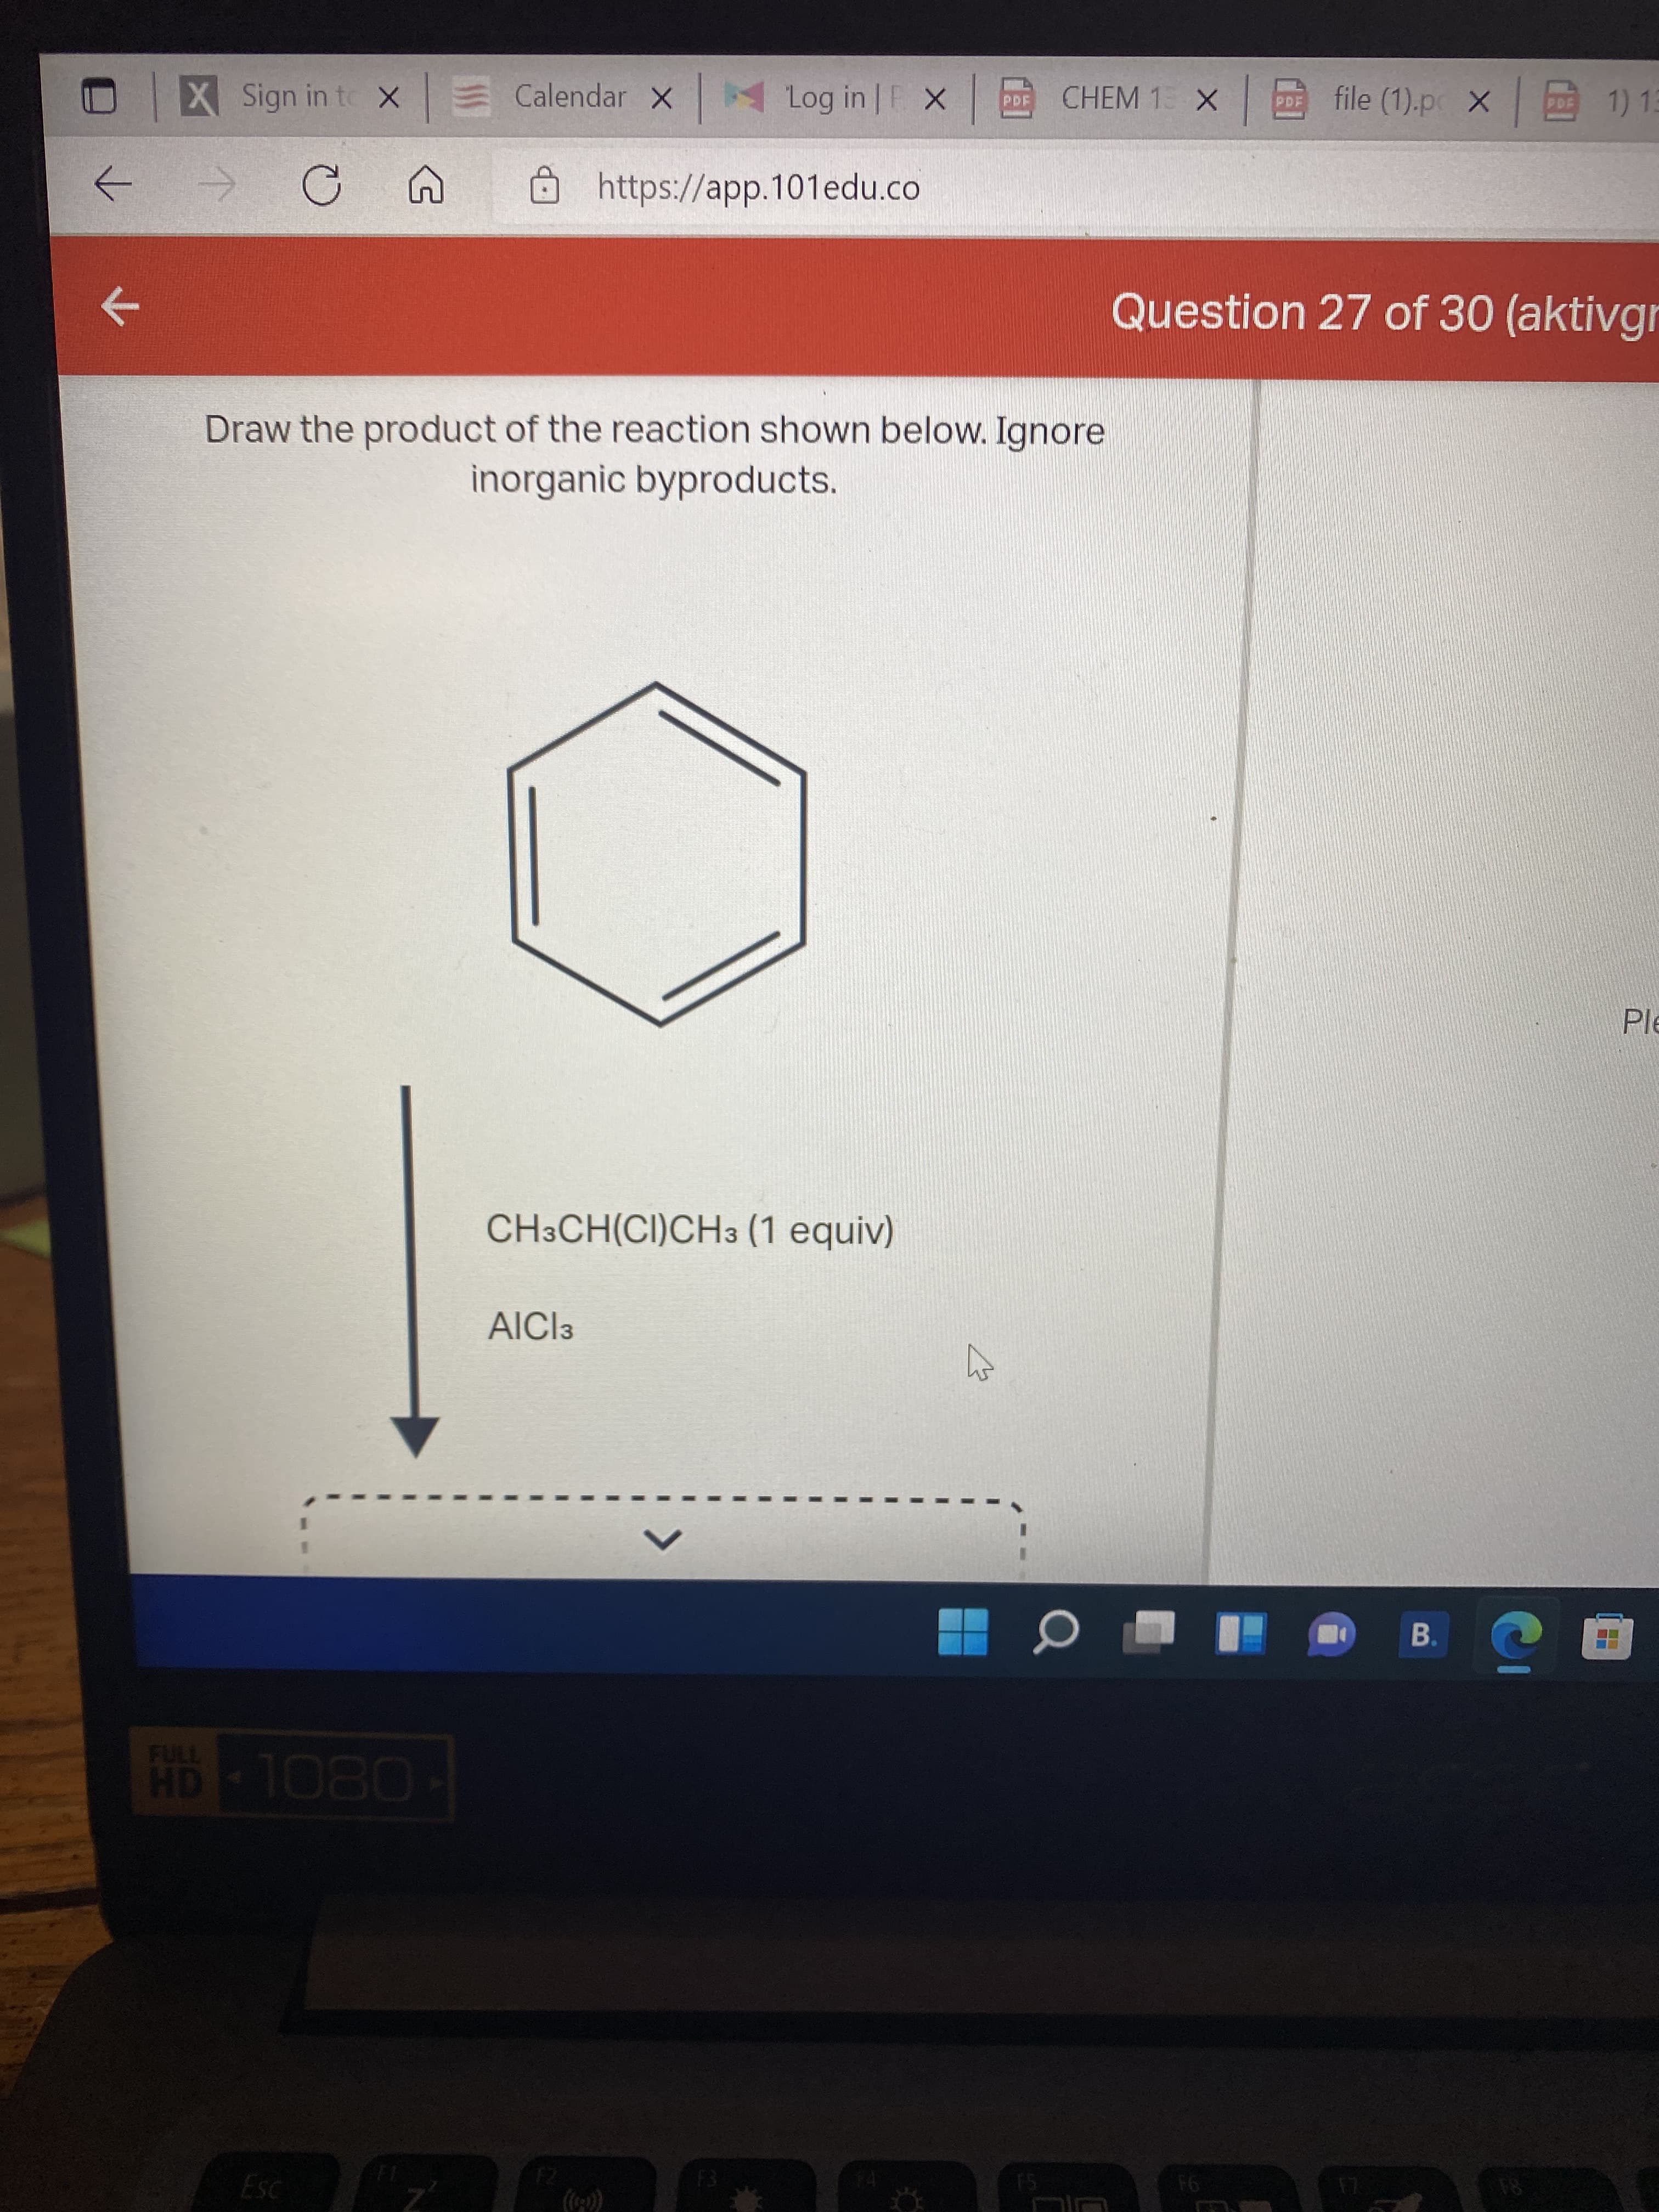 X Sign in to X E Calendar X
Log in F X
CHEM 1: X |回
file (1).p X 1)13
Ohttps://app.101edu.co
->
->
Question 27 of 30 (aktivgr
Draw the product of the reaction shown below. Ignore
inorganic byproducts.
Ple
CH3CH(CI)CH3 (1 equiv)
AICI3
B.
FULL
94
81
